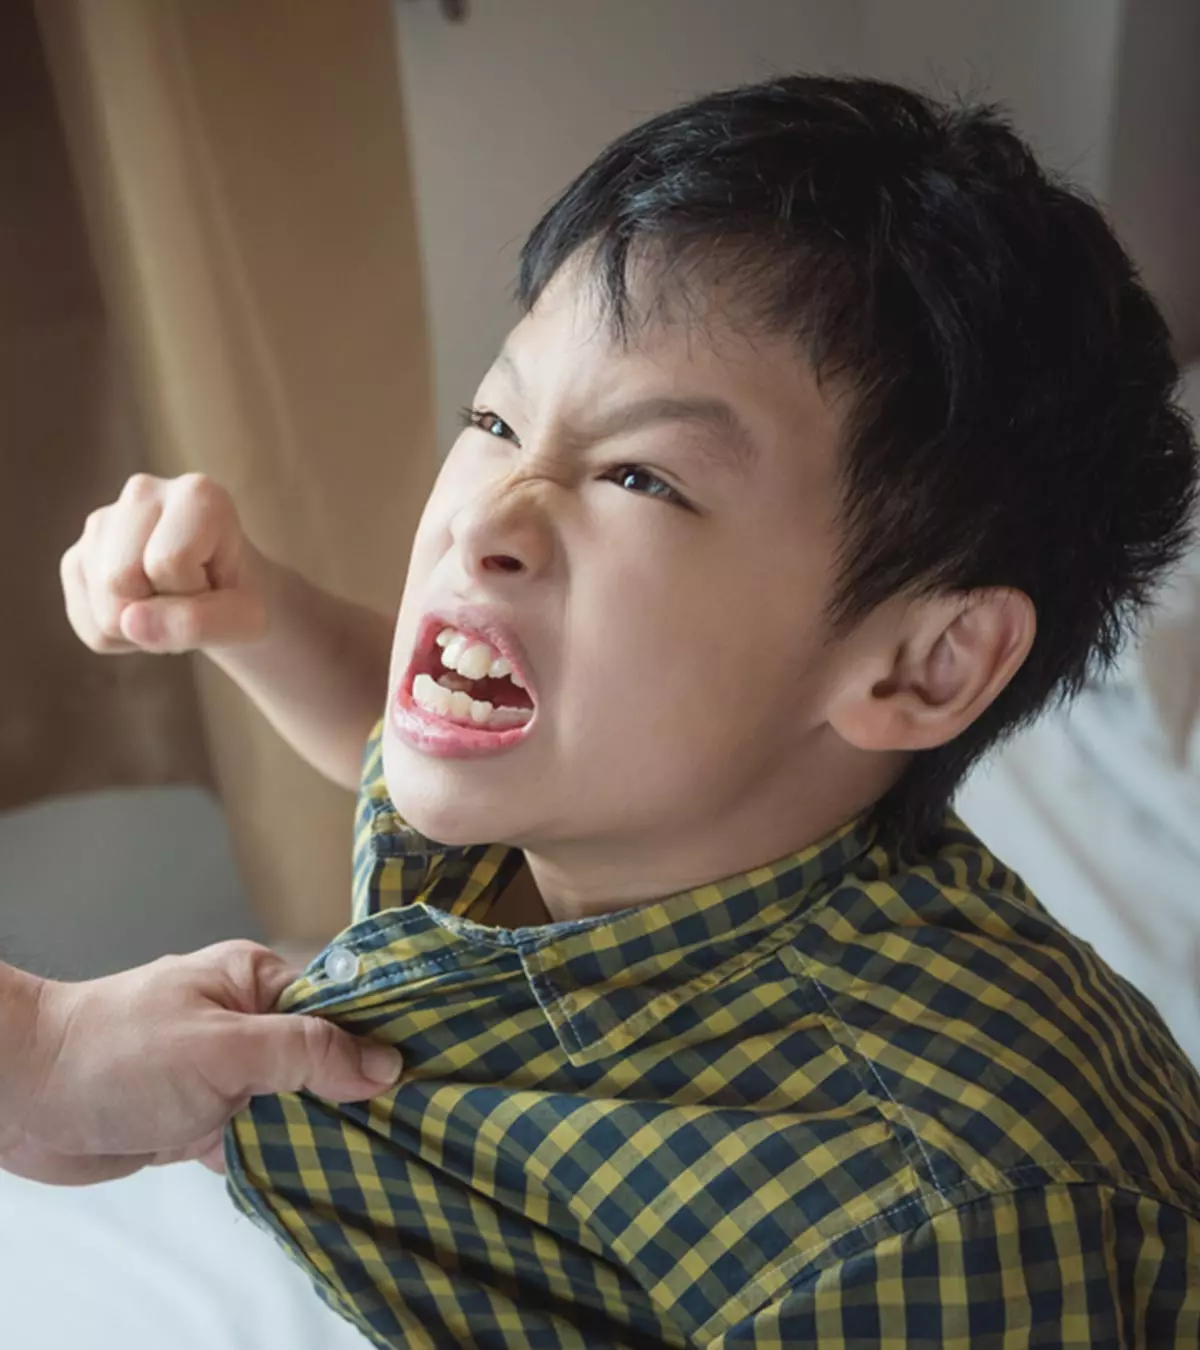 Aggression In Children: Types, Causes, And Risks